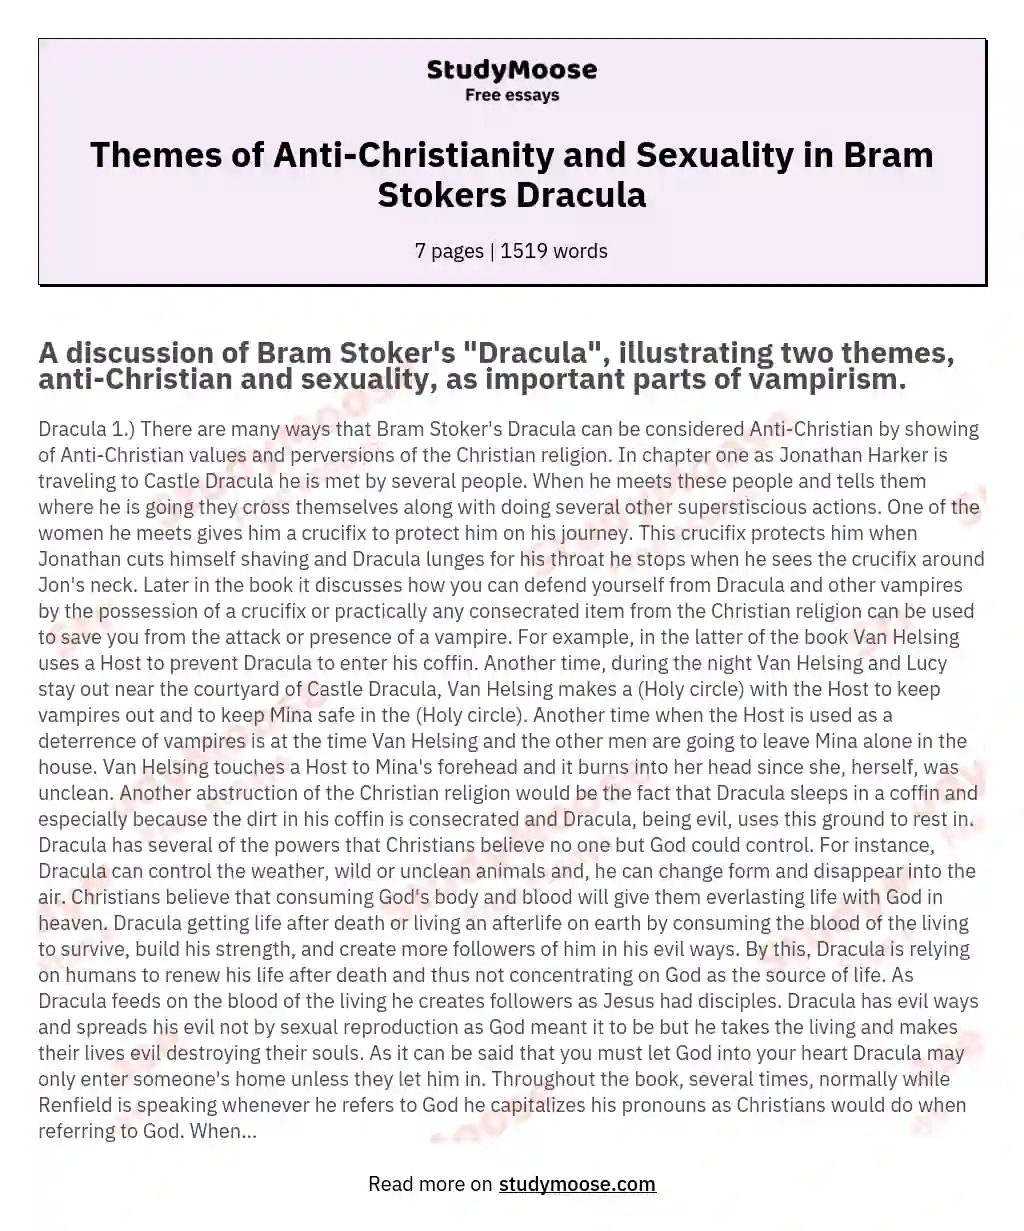 Themes of Anti-Christianity and Sexuality in Bram Stokers Dracula essay